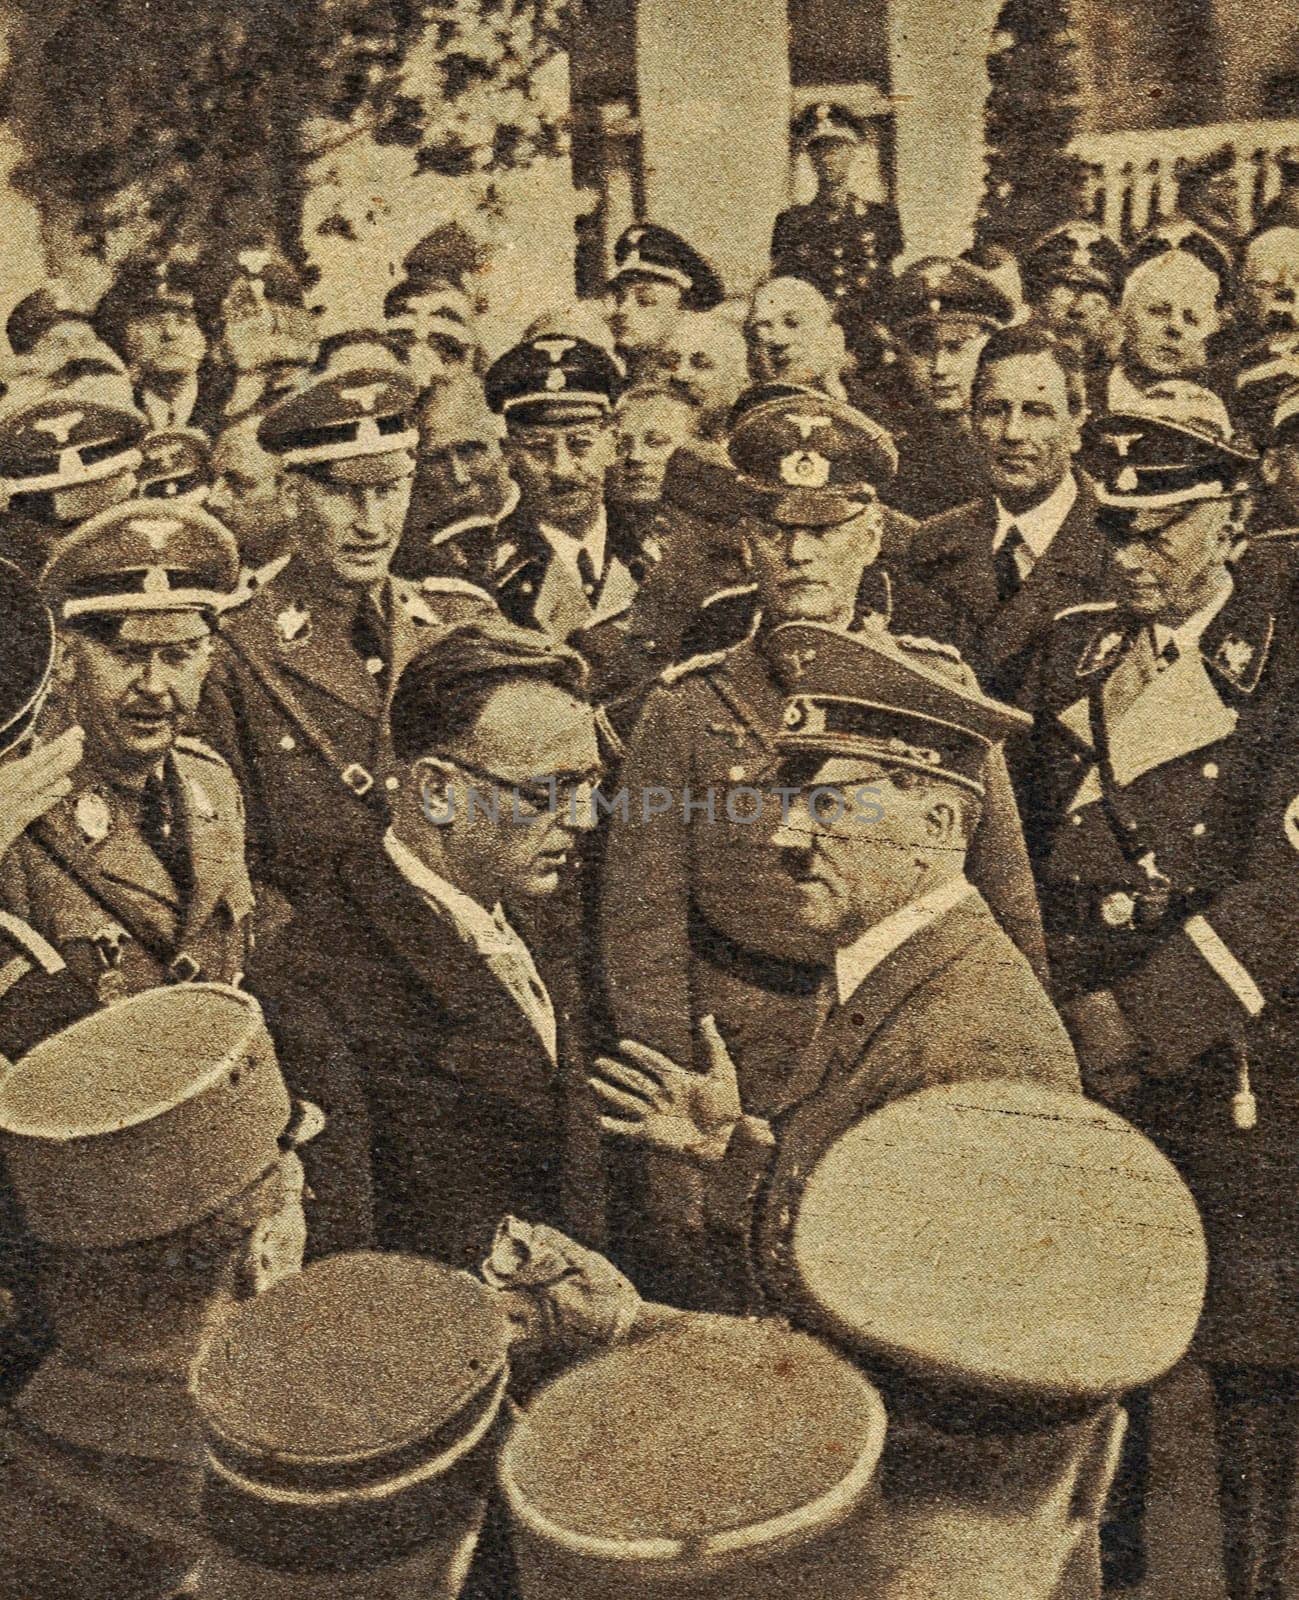 WIENNA, AUSTRIA - 1938: Arthur Seyss-Inquart with Adolf Hitler . Seyss-Inquart drafted the legislative act reducing Austria to a province of Germany and signed it into law on 13 March. With Hitler's approval he became Governor (Reichsstatthalter) of the newly named Ostmark, thus becoming Hitler's personal representative in Austria.